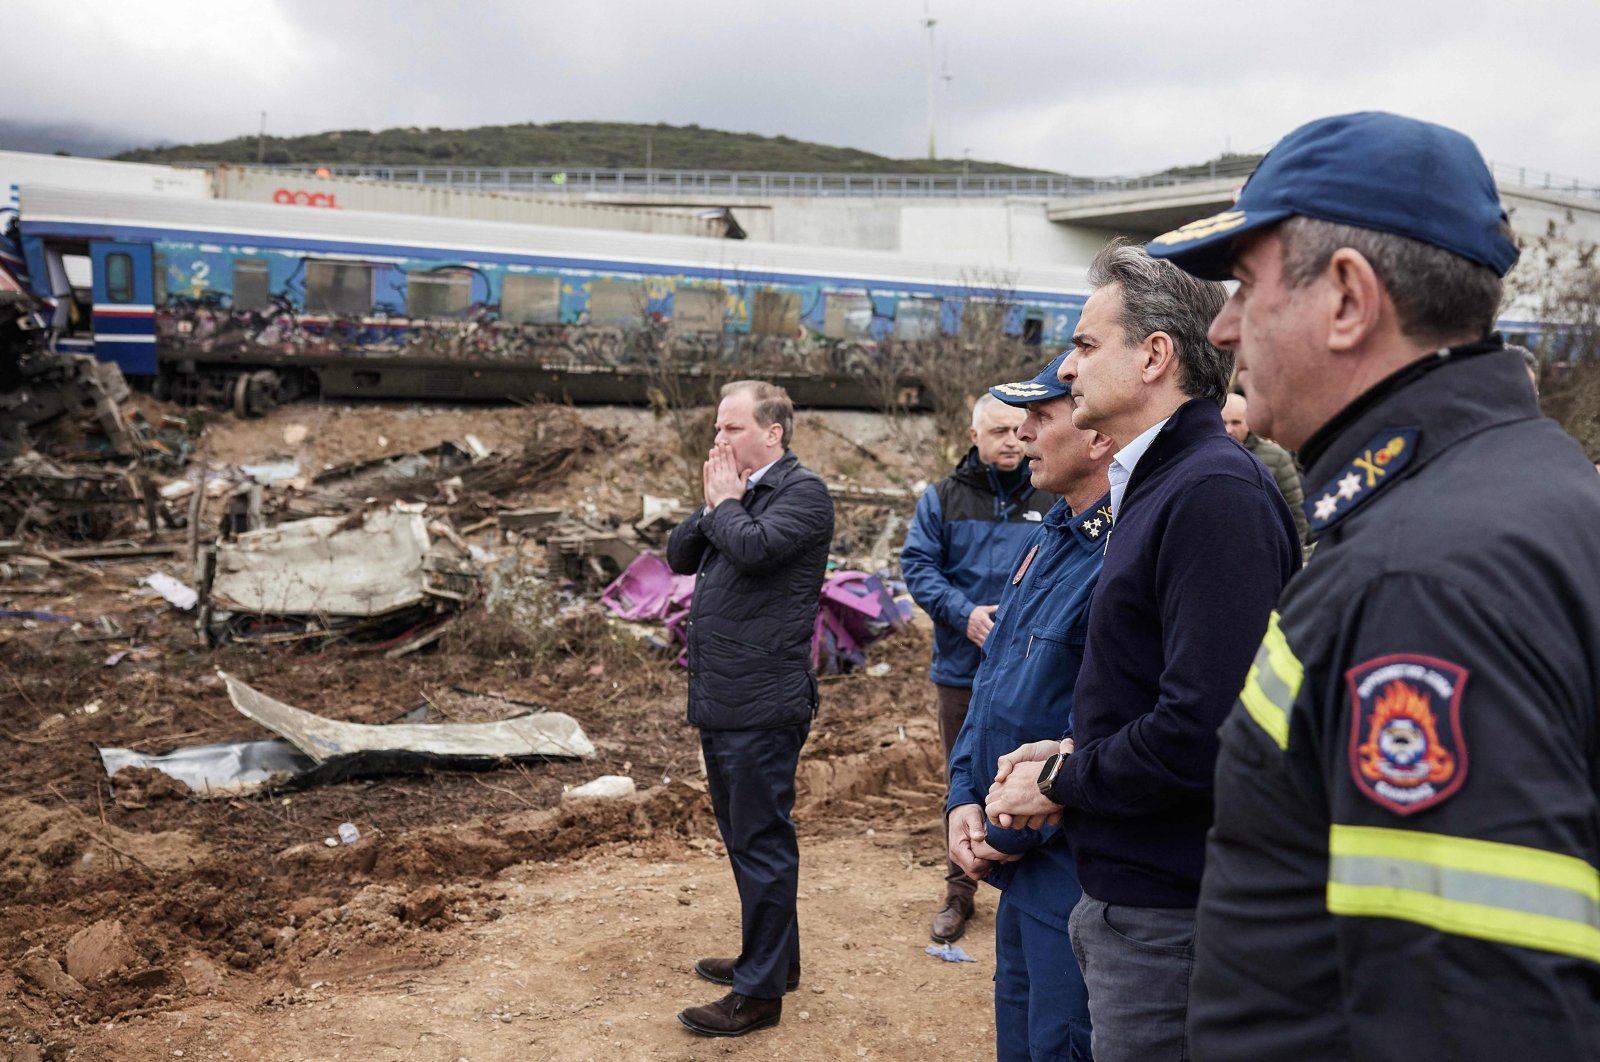 Greek transport minister, Kostas Karamanls (Center) reacting as he visits a crash site with Greek Prime Minister Kyriakos Mitsotakis (Second right) following the deadly train accident where at least 38 people died and another 85 were injured near the Greek city of Larissa. March 1, 2023. (AFP Photo)